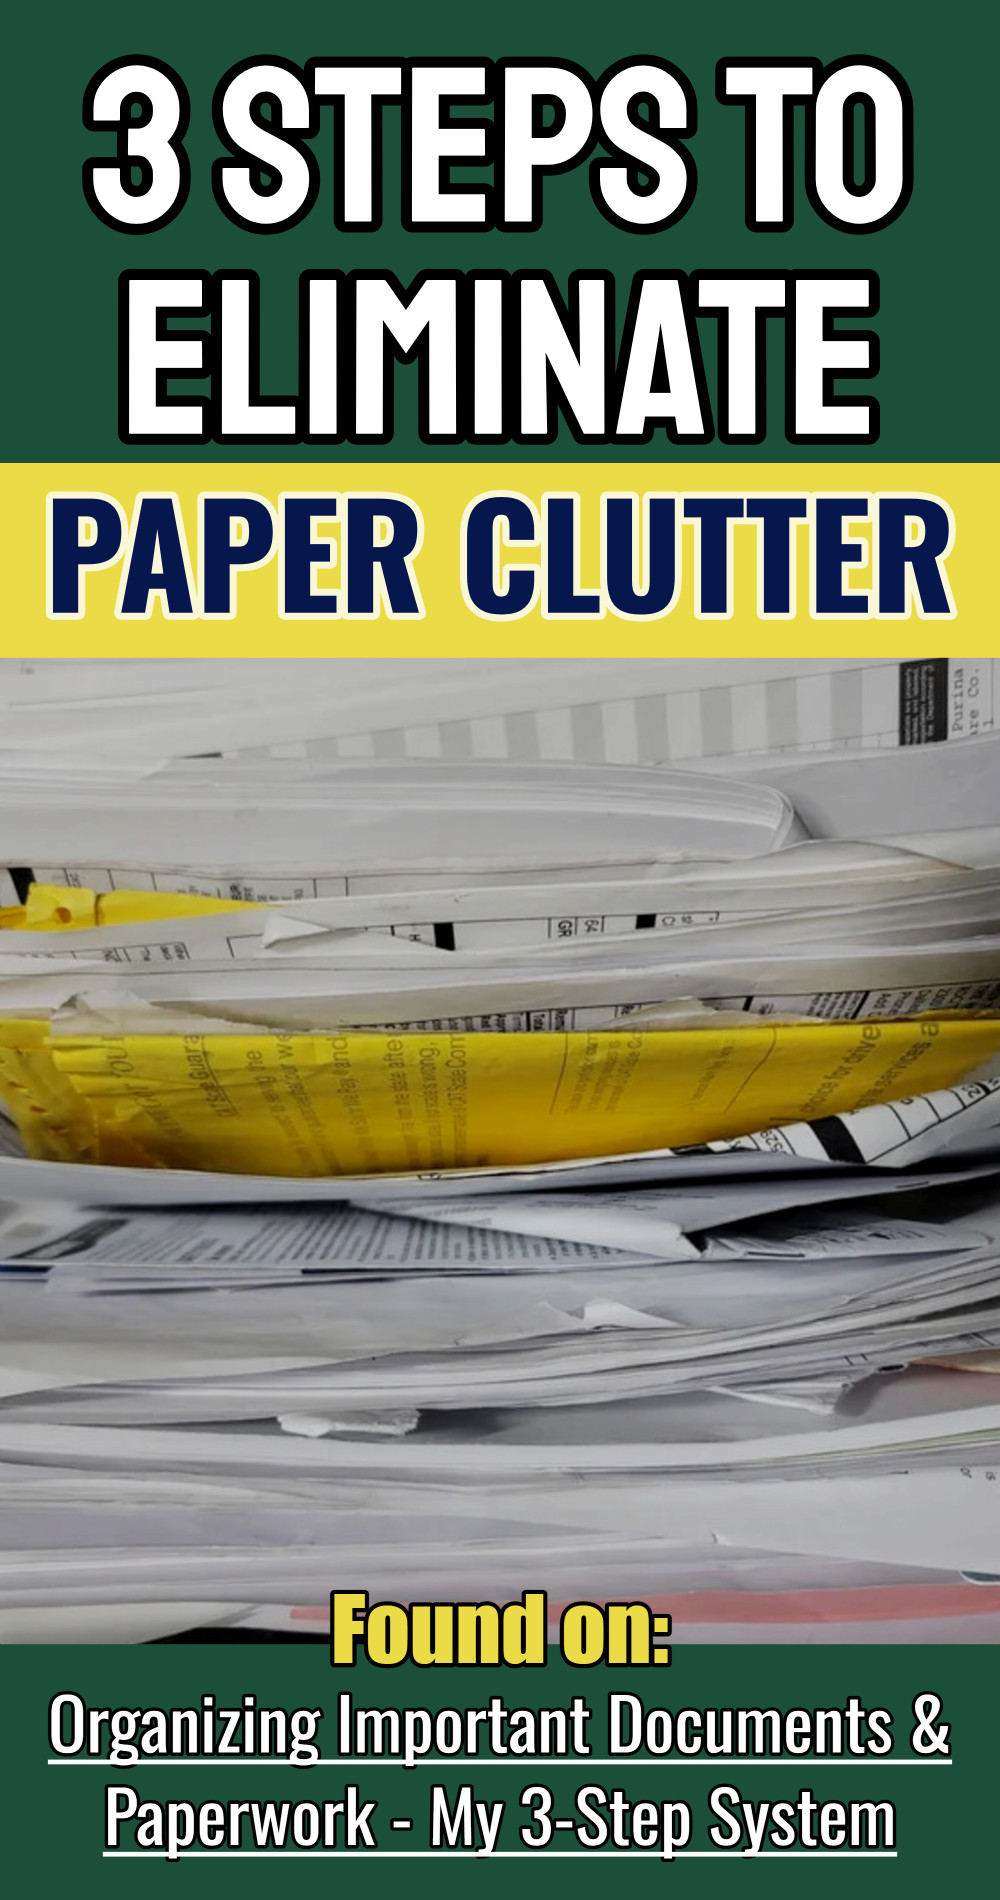 3 steps to eliminate paper clutter